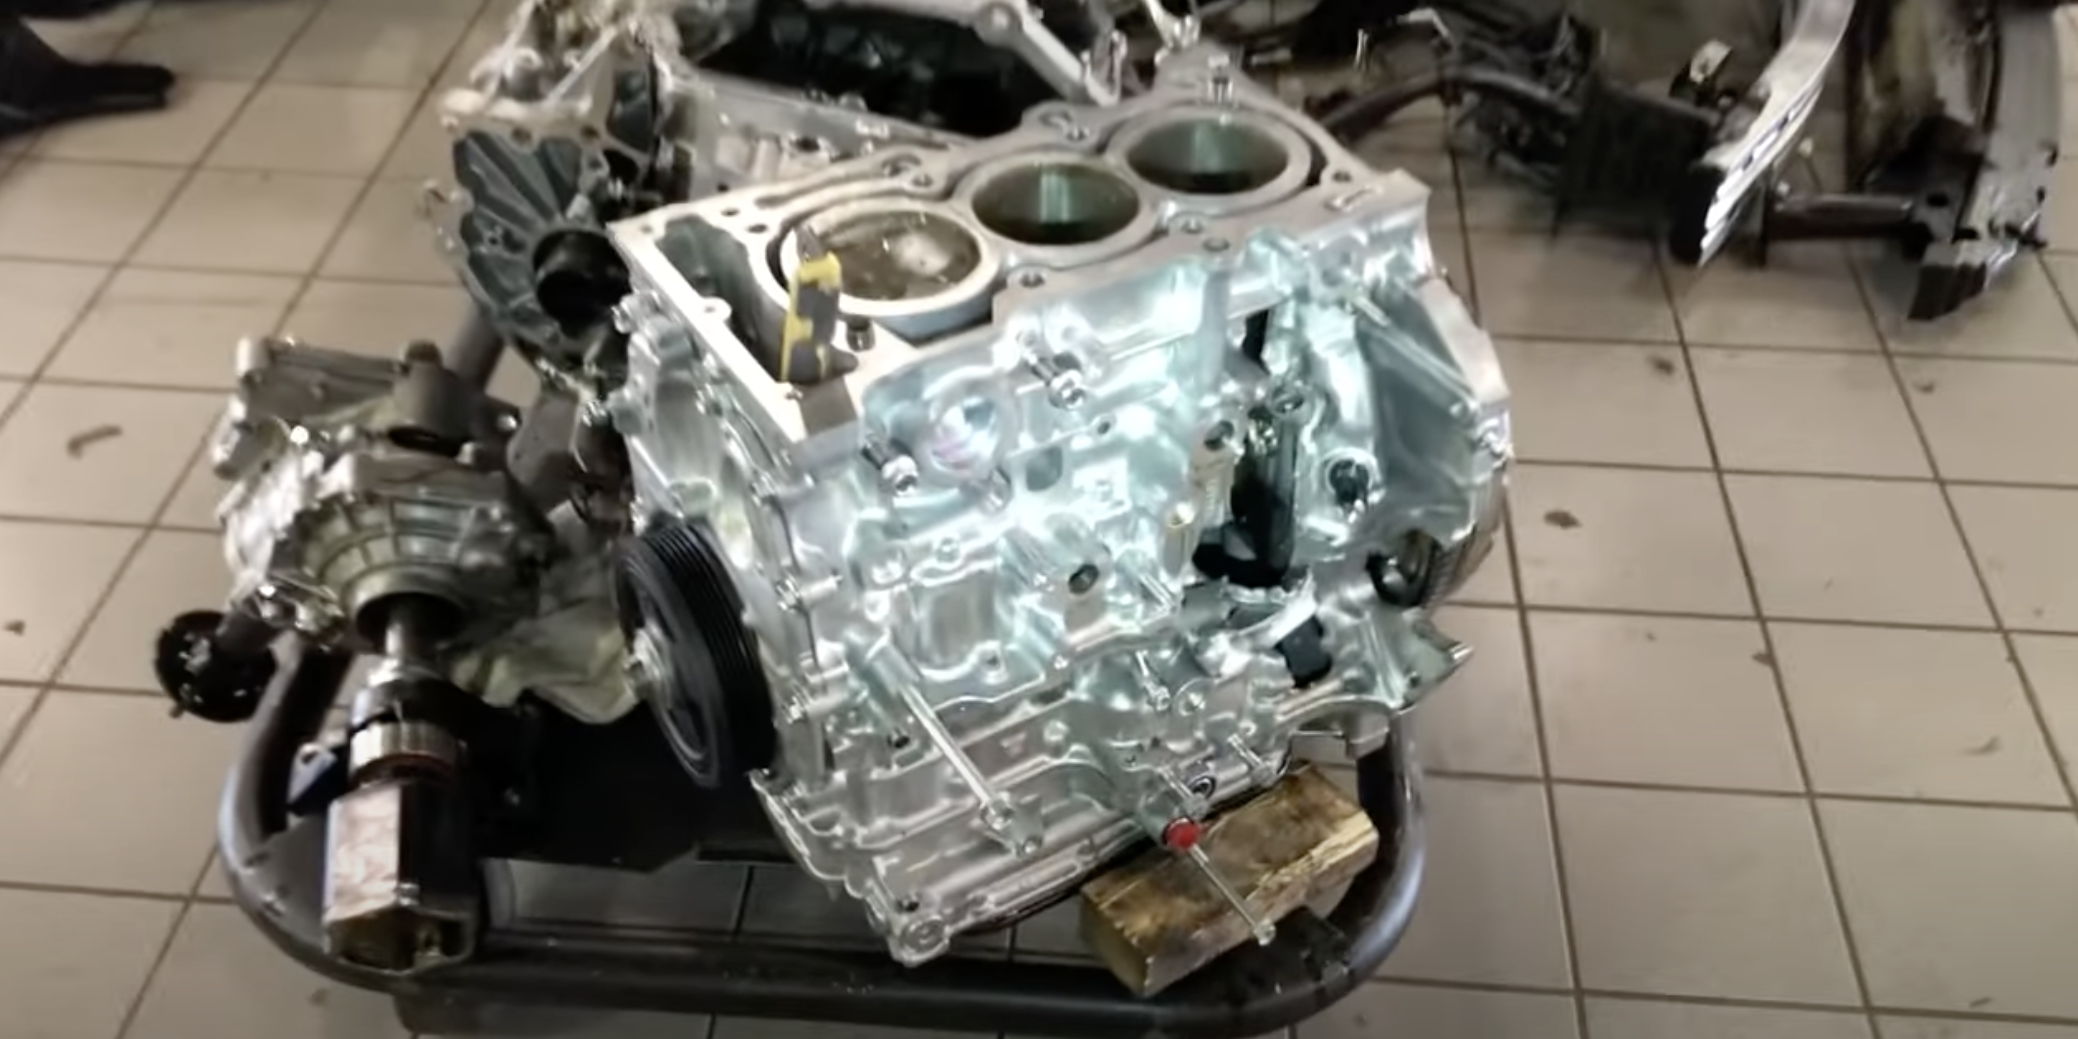 This Toyota GR Corolla Engine Carnage Is Hard to Look At